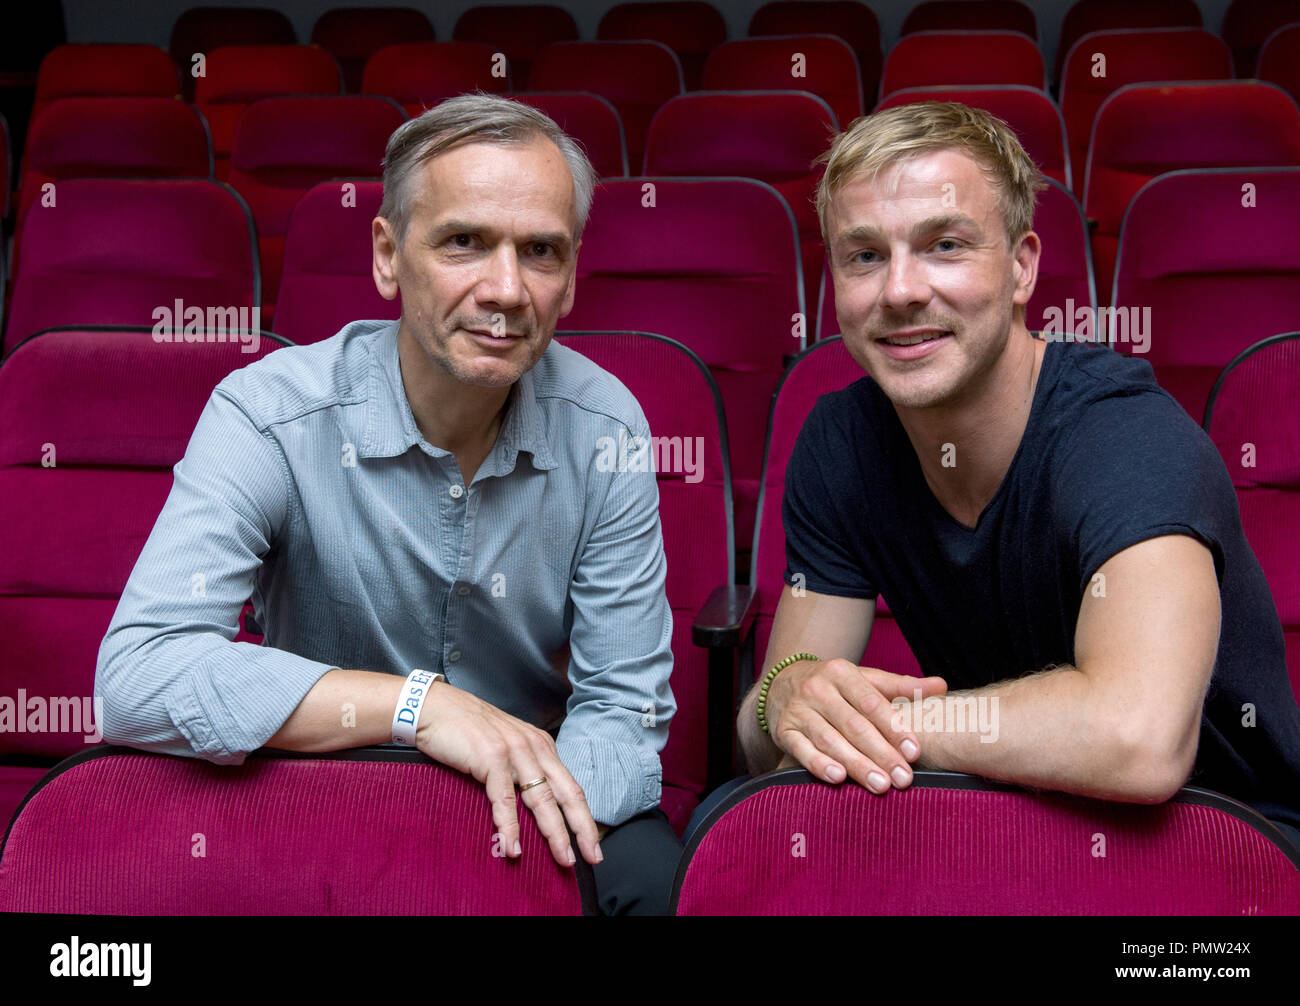 19 September 2018, Saxony, Leipzig: Author Lutz Seiler (l) and actor and 'Kruso' main actor Albrecht Schuch have taken their seats in the cinema seats of the Schaubühne Lindenfels before the preview of the MDR co-production 'Kruso' begins. The film based on the novel of the same name tells the summer of 1989 on the island of Hiddensee from the perspective of alternatives and dropouts. 'Kruso' will be aired on September 26th on The First. Photo: Hendrik Schmidt/dpa-Zentralbild/dpa Stock Photo